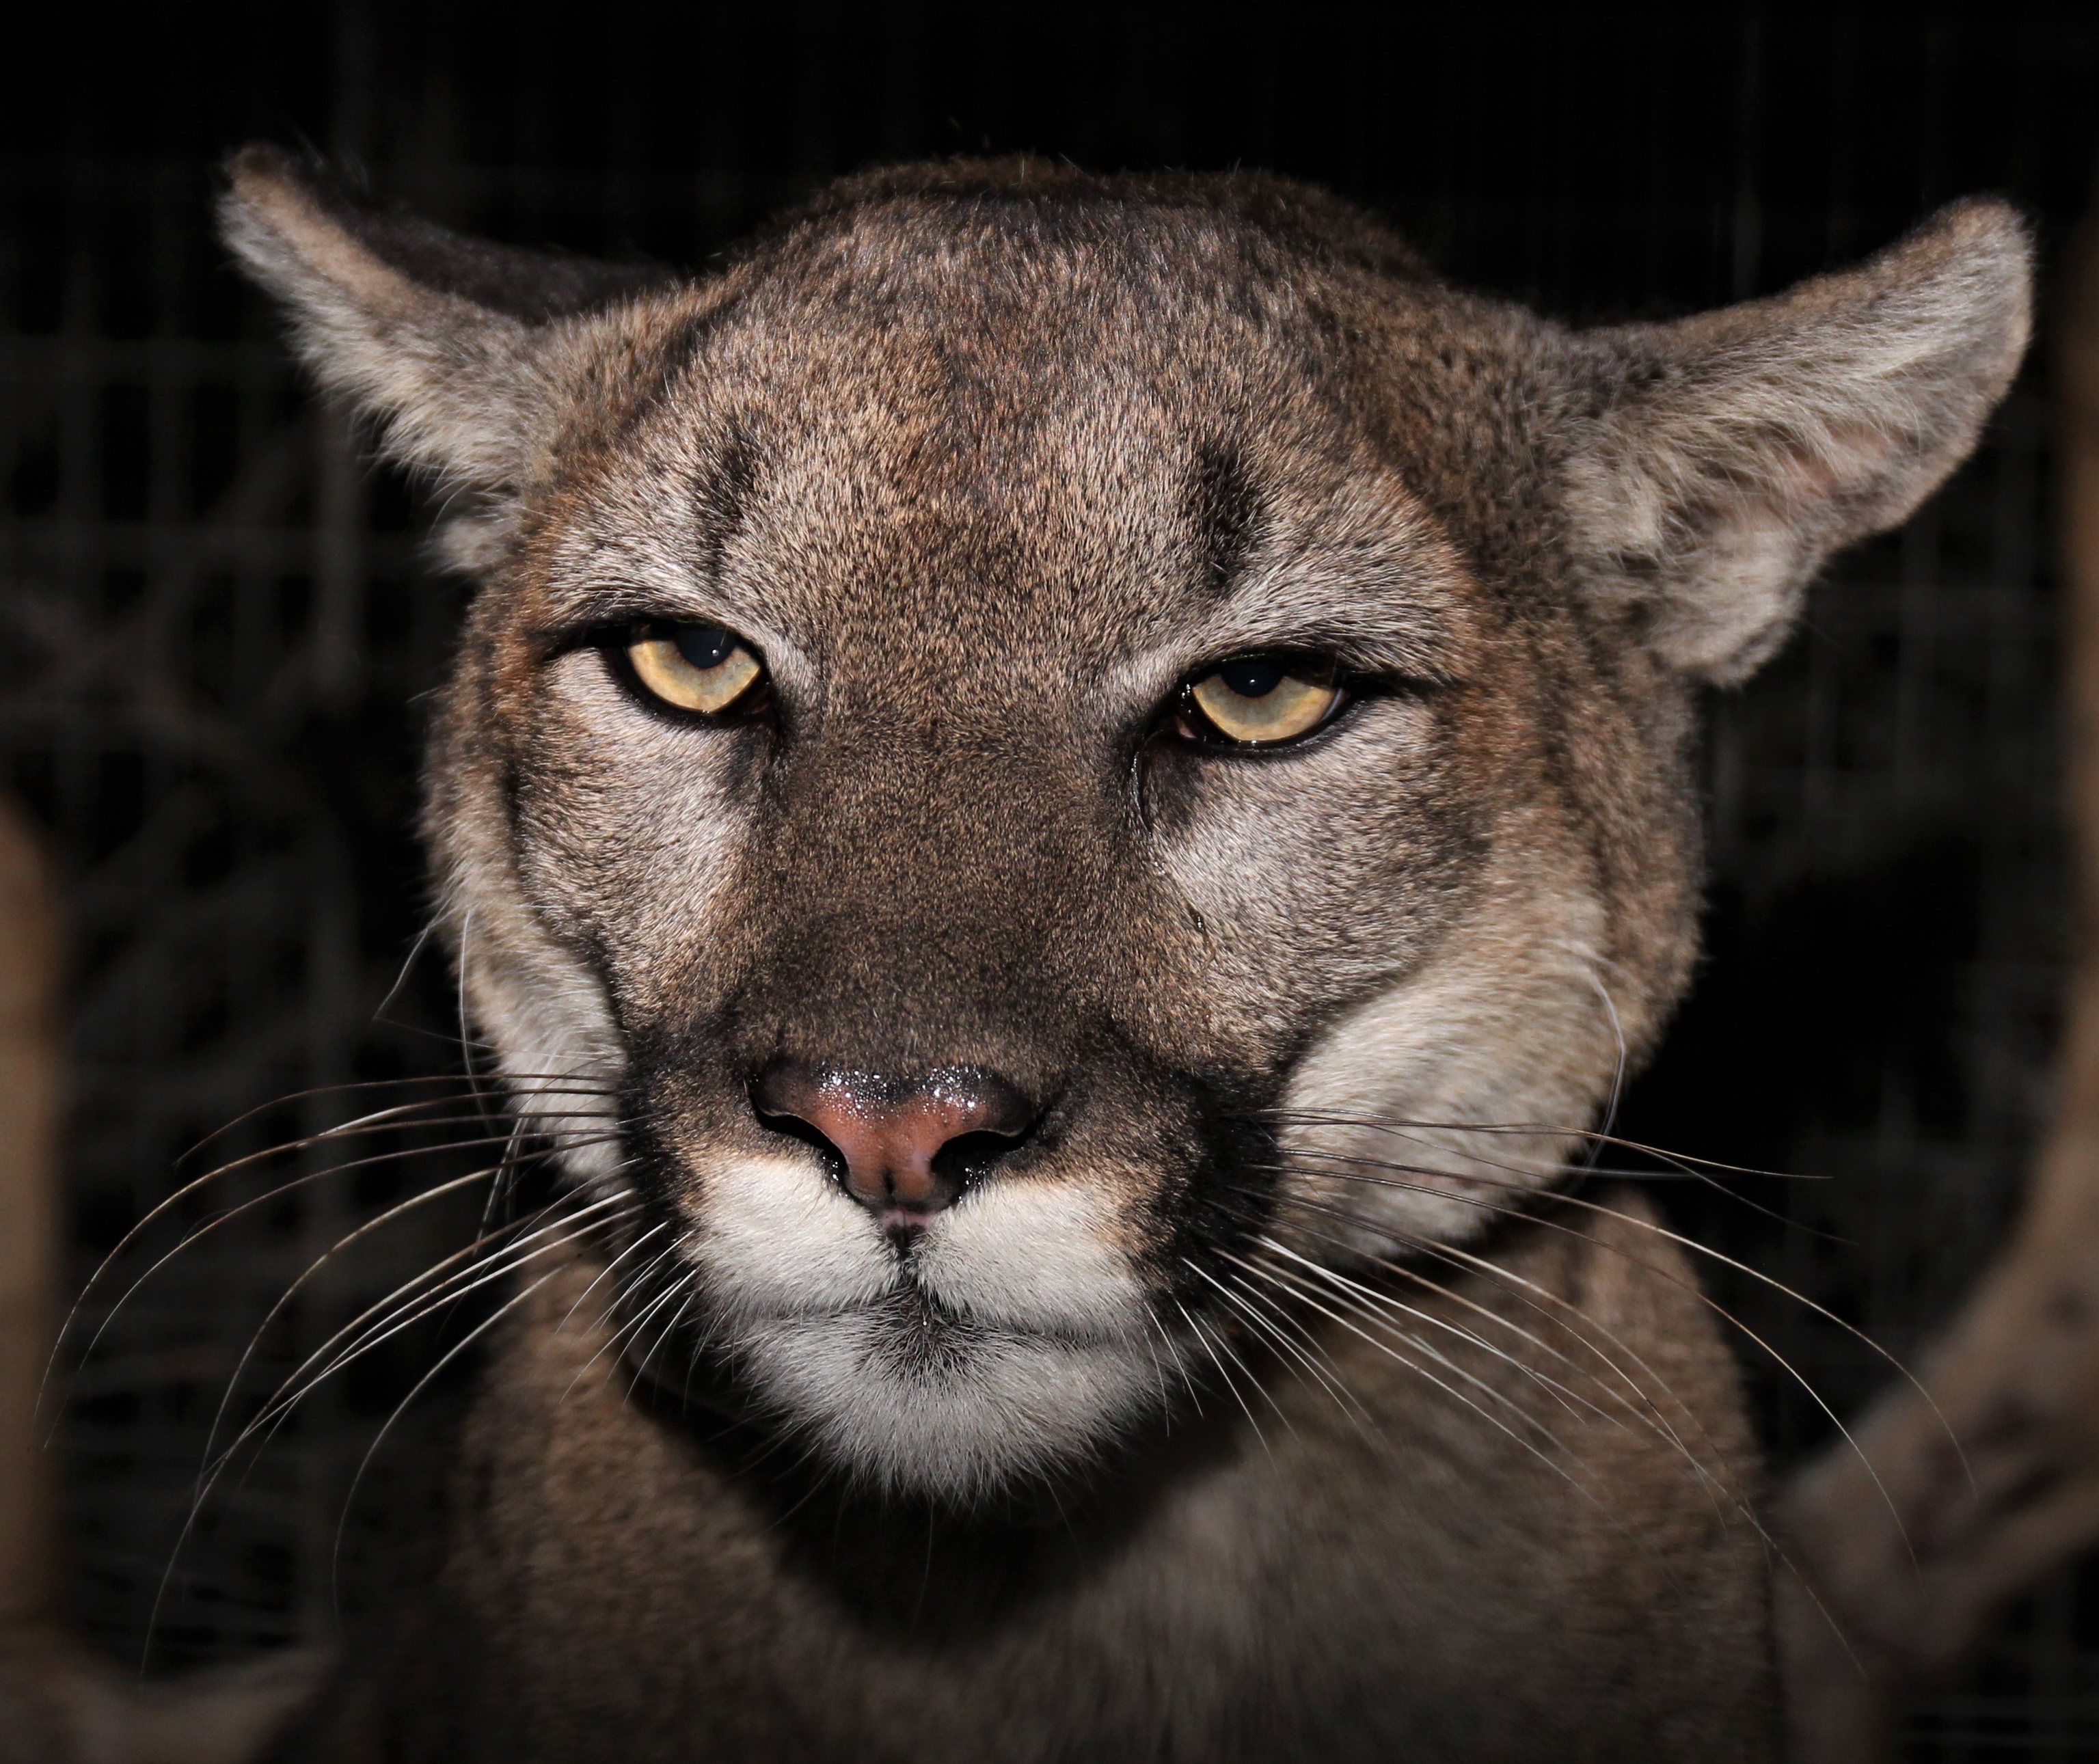 a close-up of a mountain lion's face